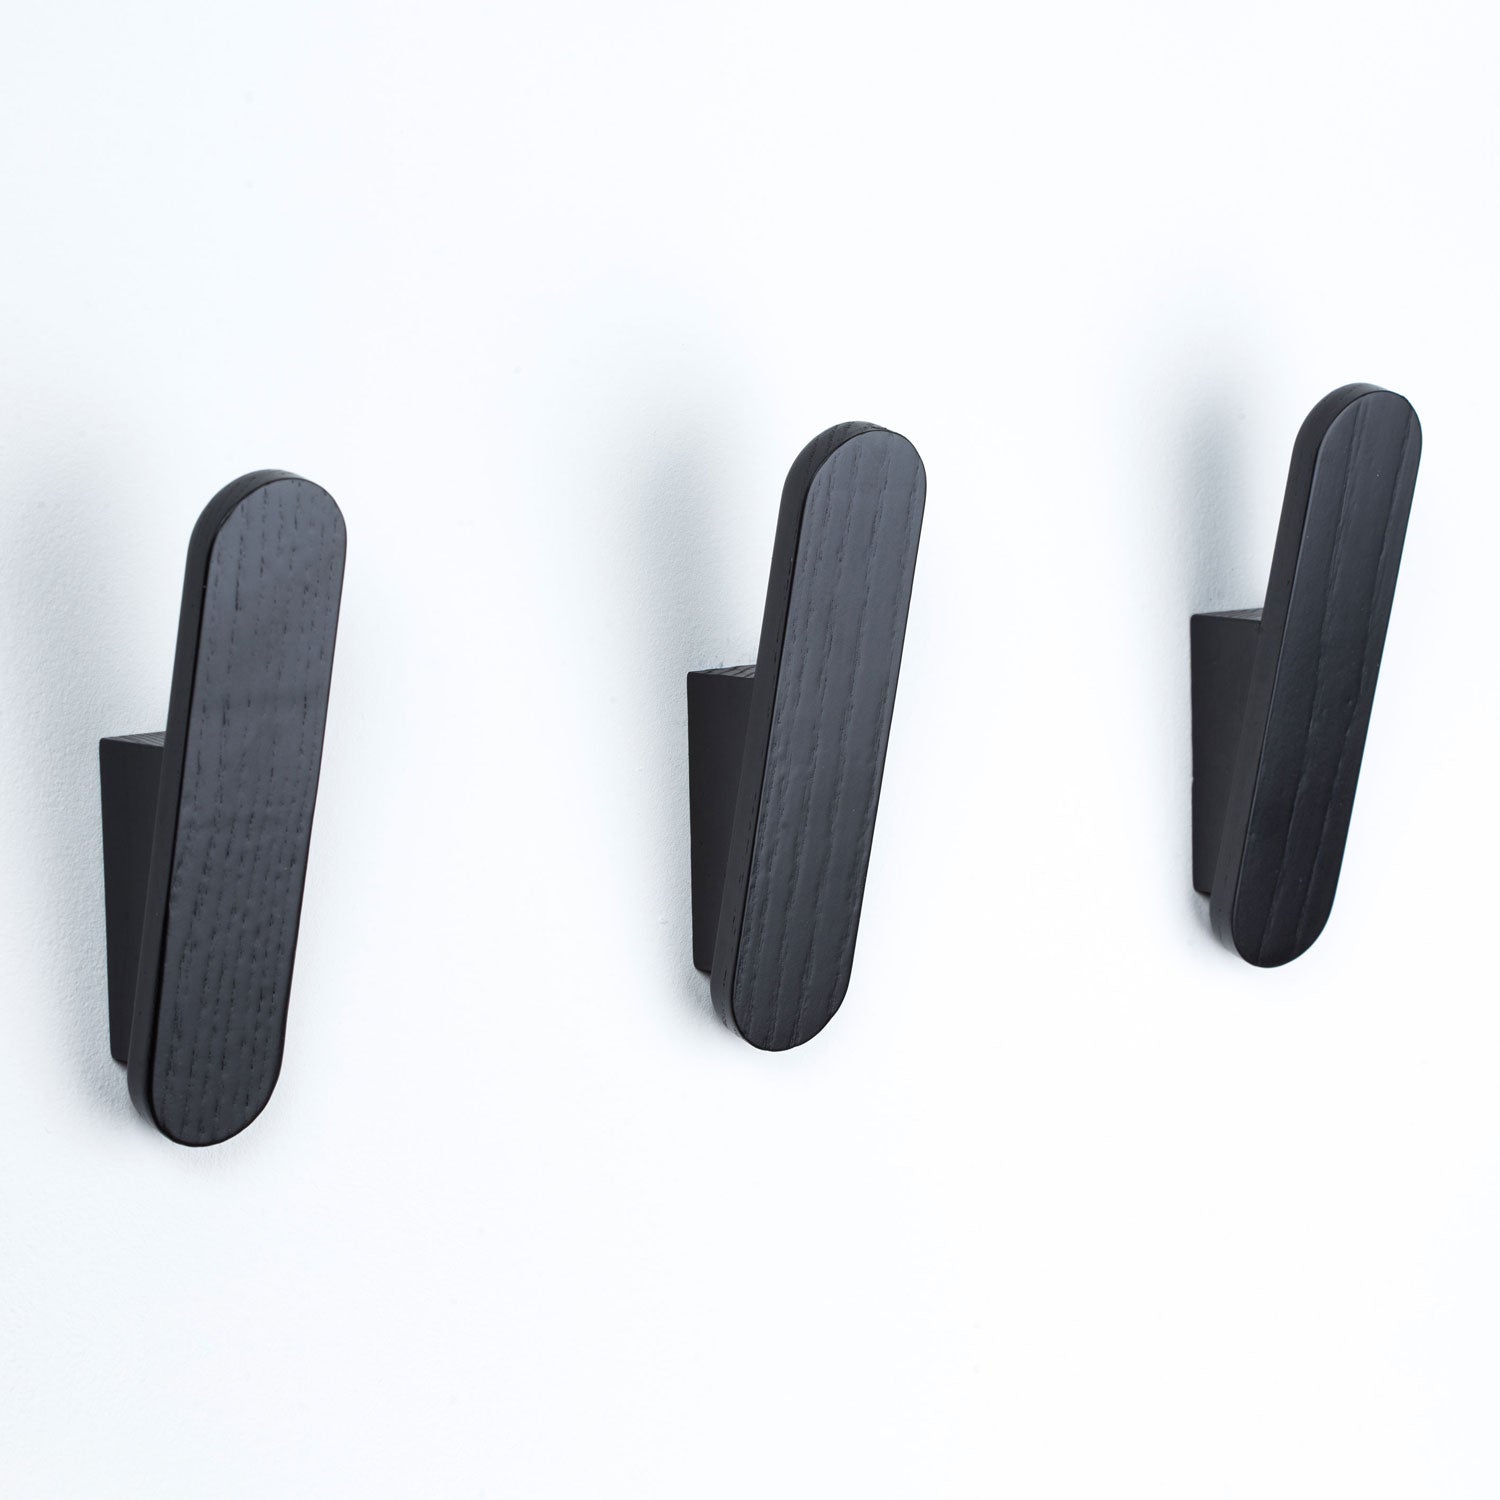 Tallo Single Wooden Wall Hooks, Made From Responsibly-Sourced Timber, Maple